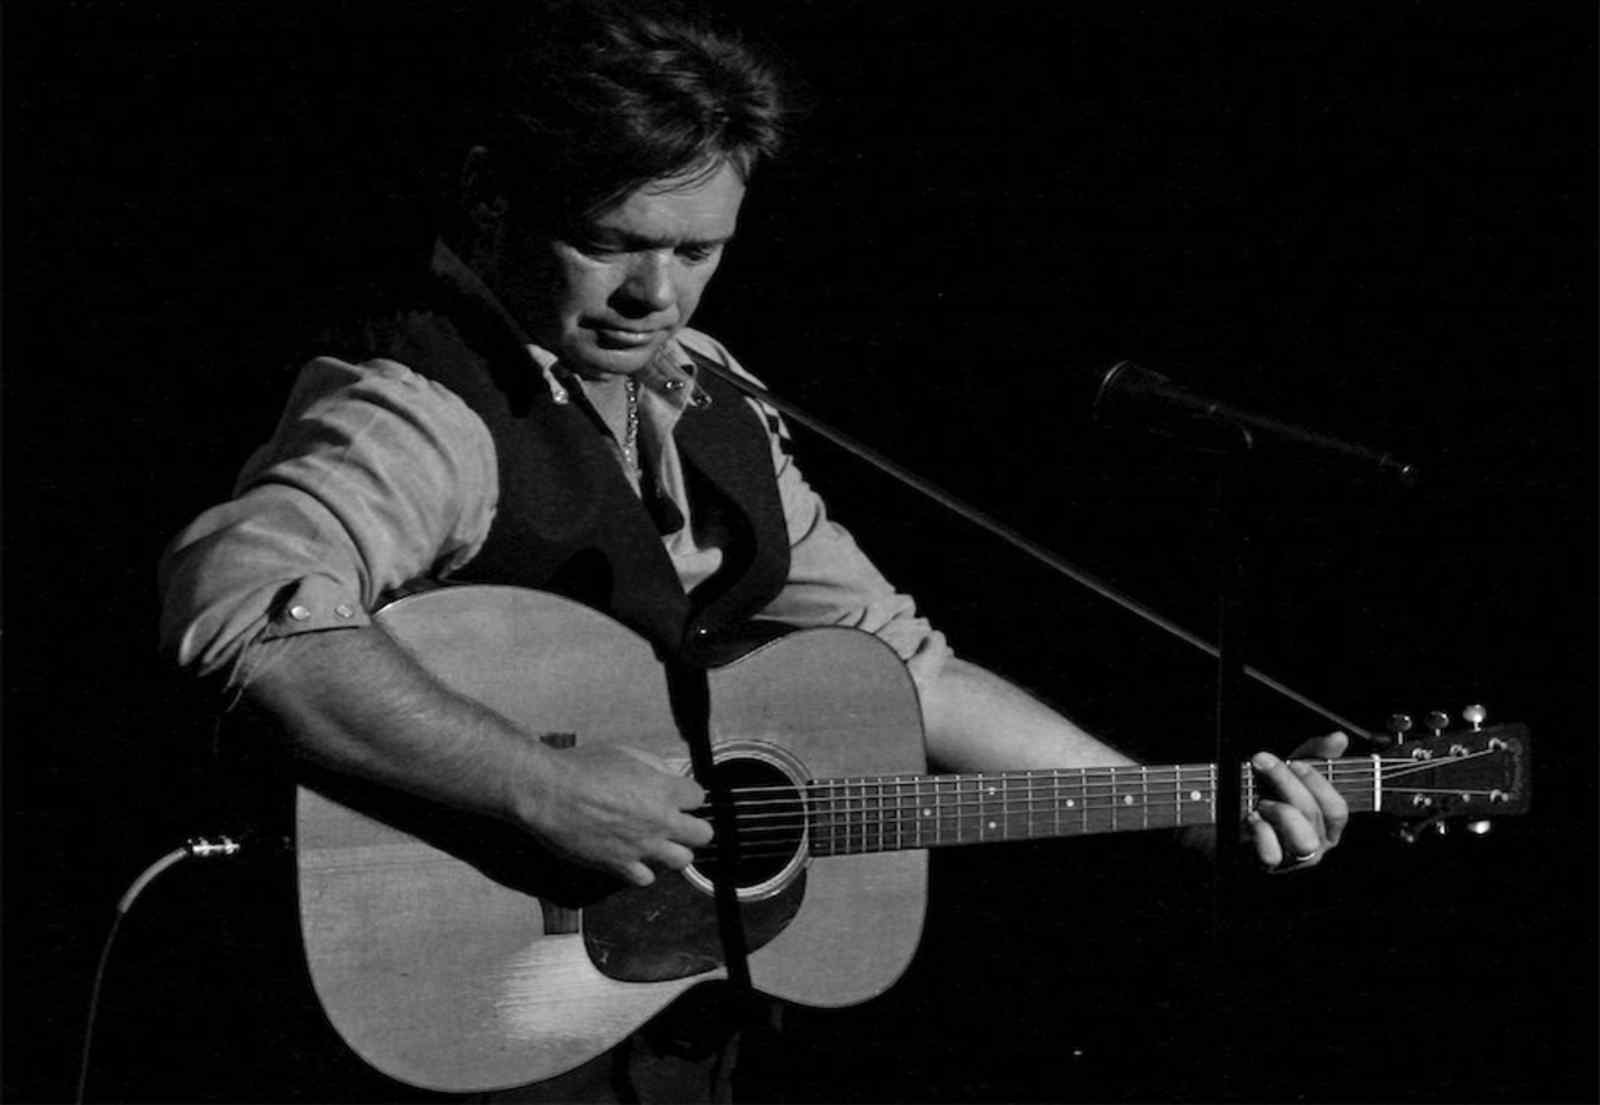 Storytellers Series Featuring John Mellencamp In Conversation With David Letterman